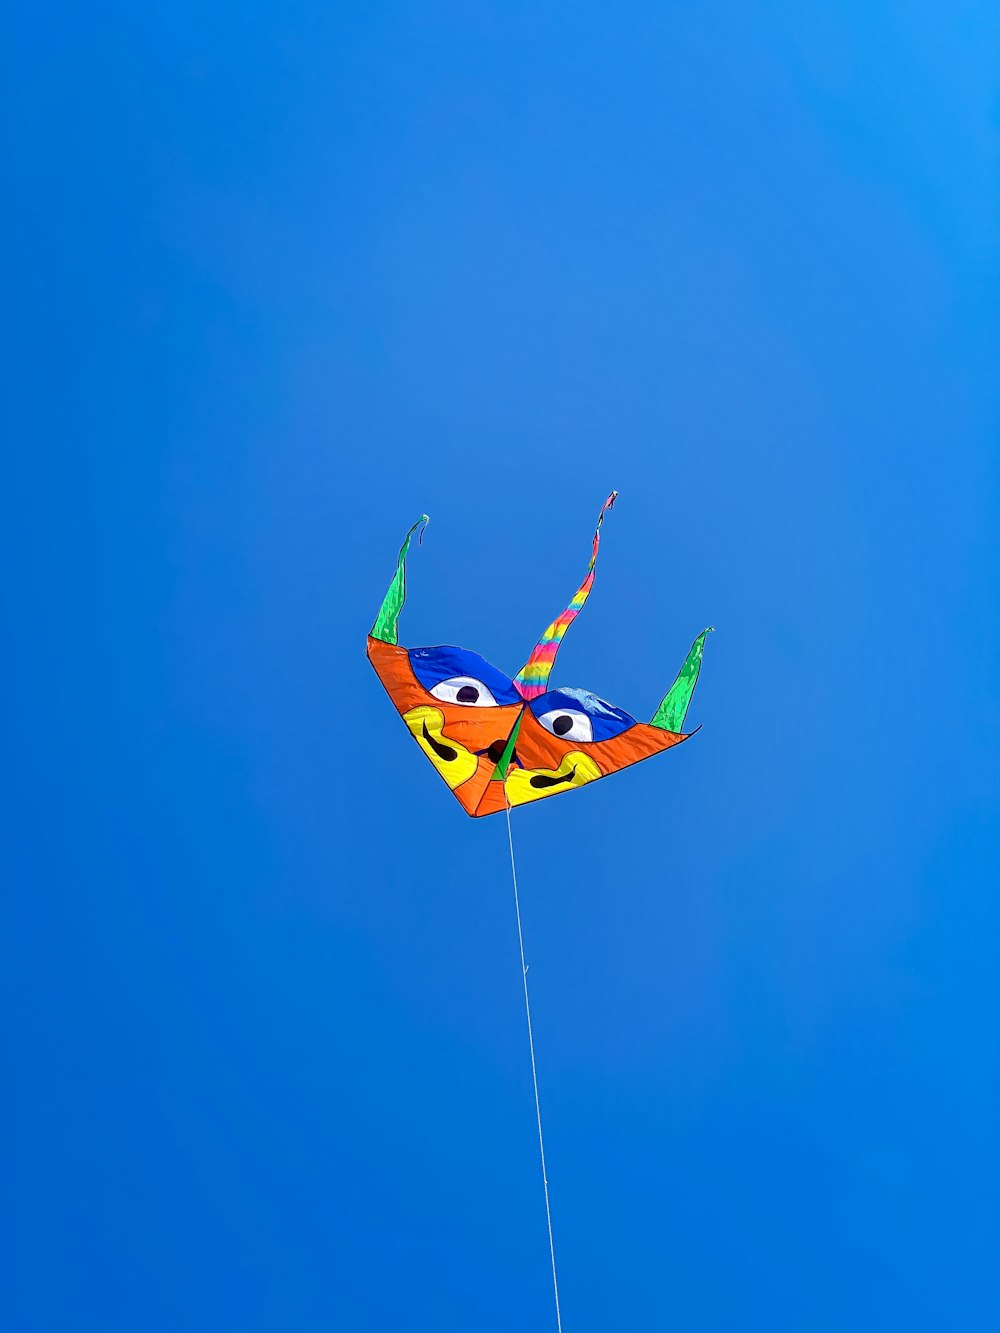 yellow and blue bird kite flying under blue sky during daytime